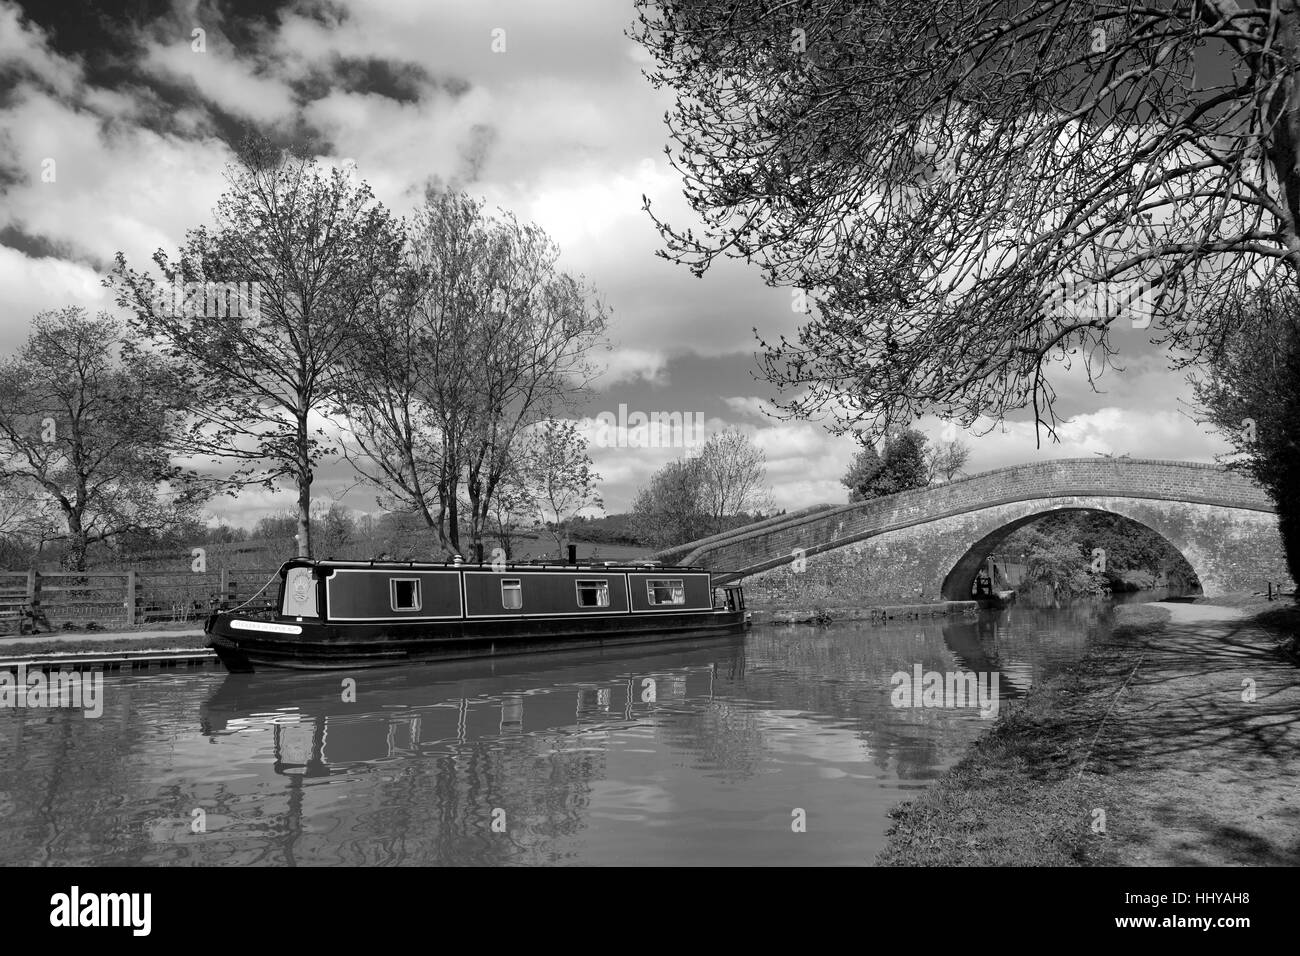 A narrowboat in the lockgates at Foxton Locks on the Grand Union Canal, Leicestershire, England; Britain; UK Stock Photo